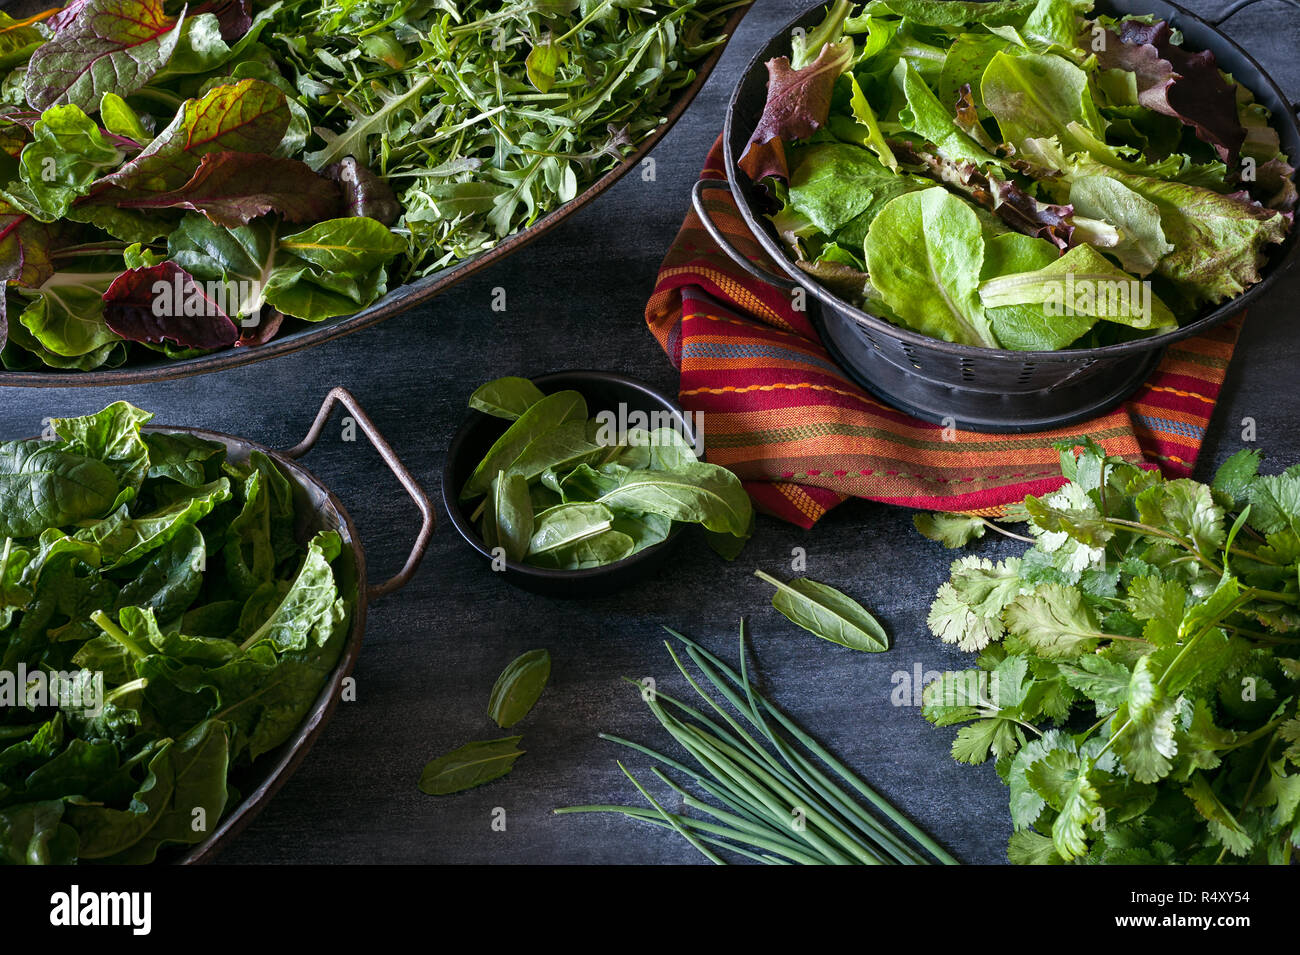 Assorted bowls filled with a variety of leafy greens including lettuce, chard, arugula, and spinach. Stock Photo